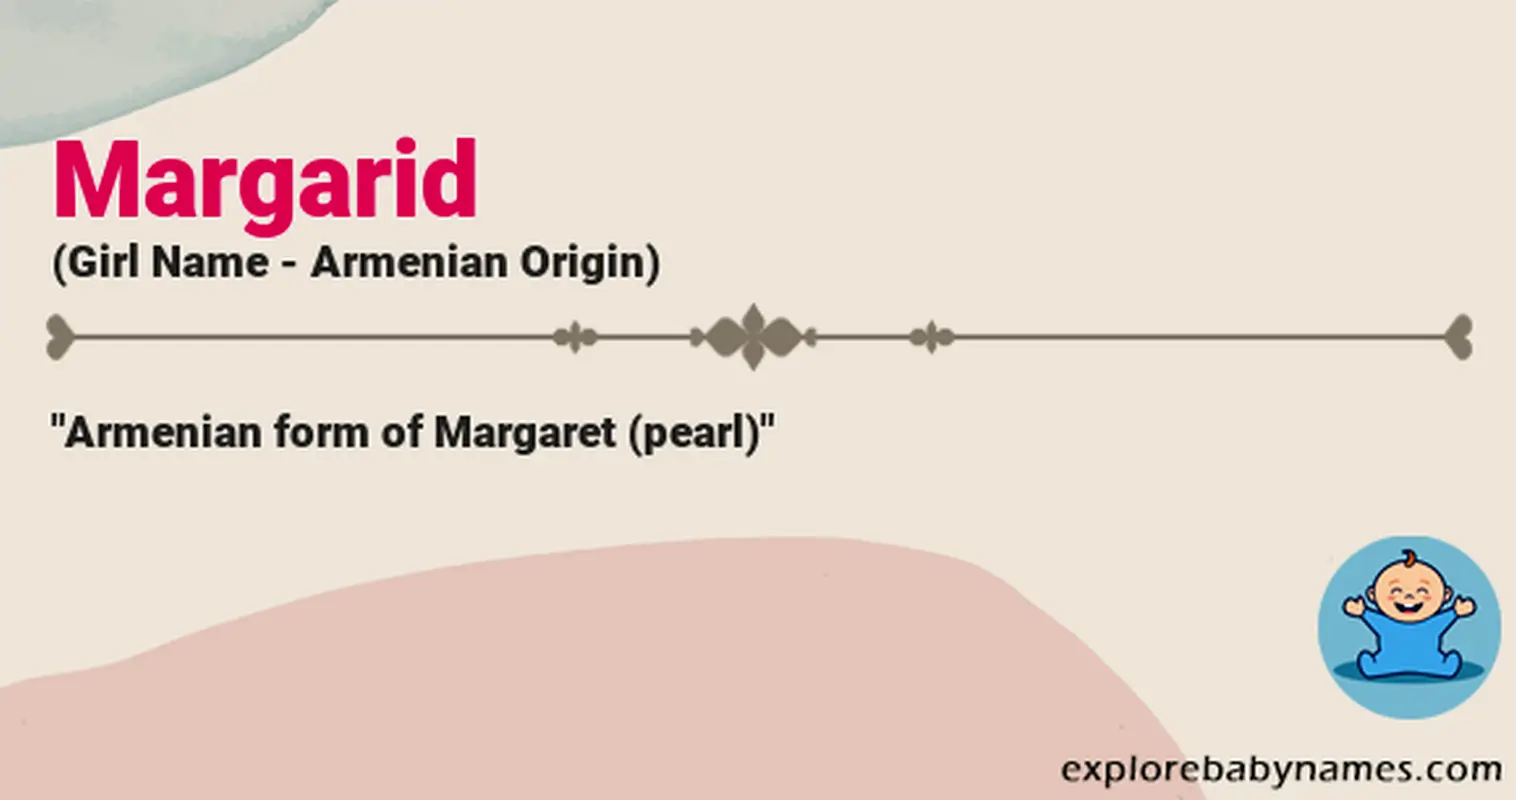 Meaning of Margarid